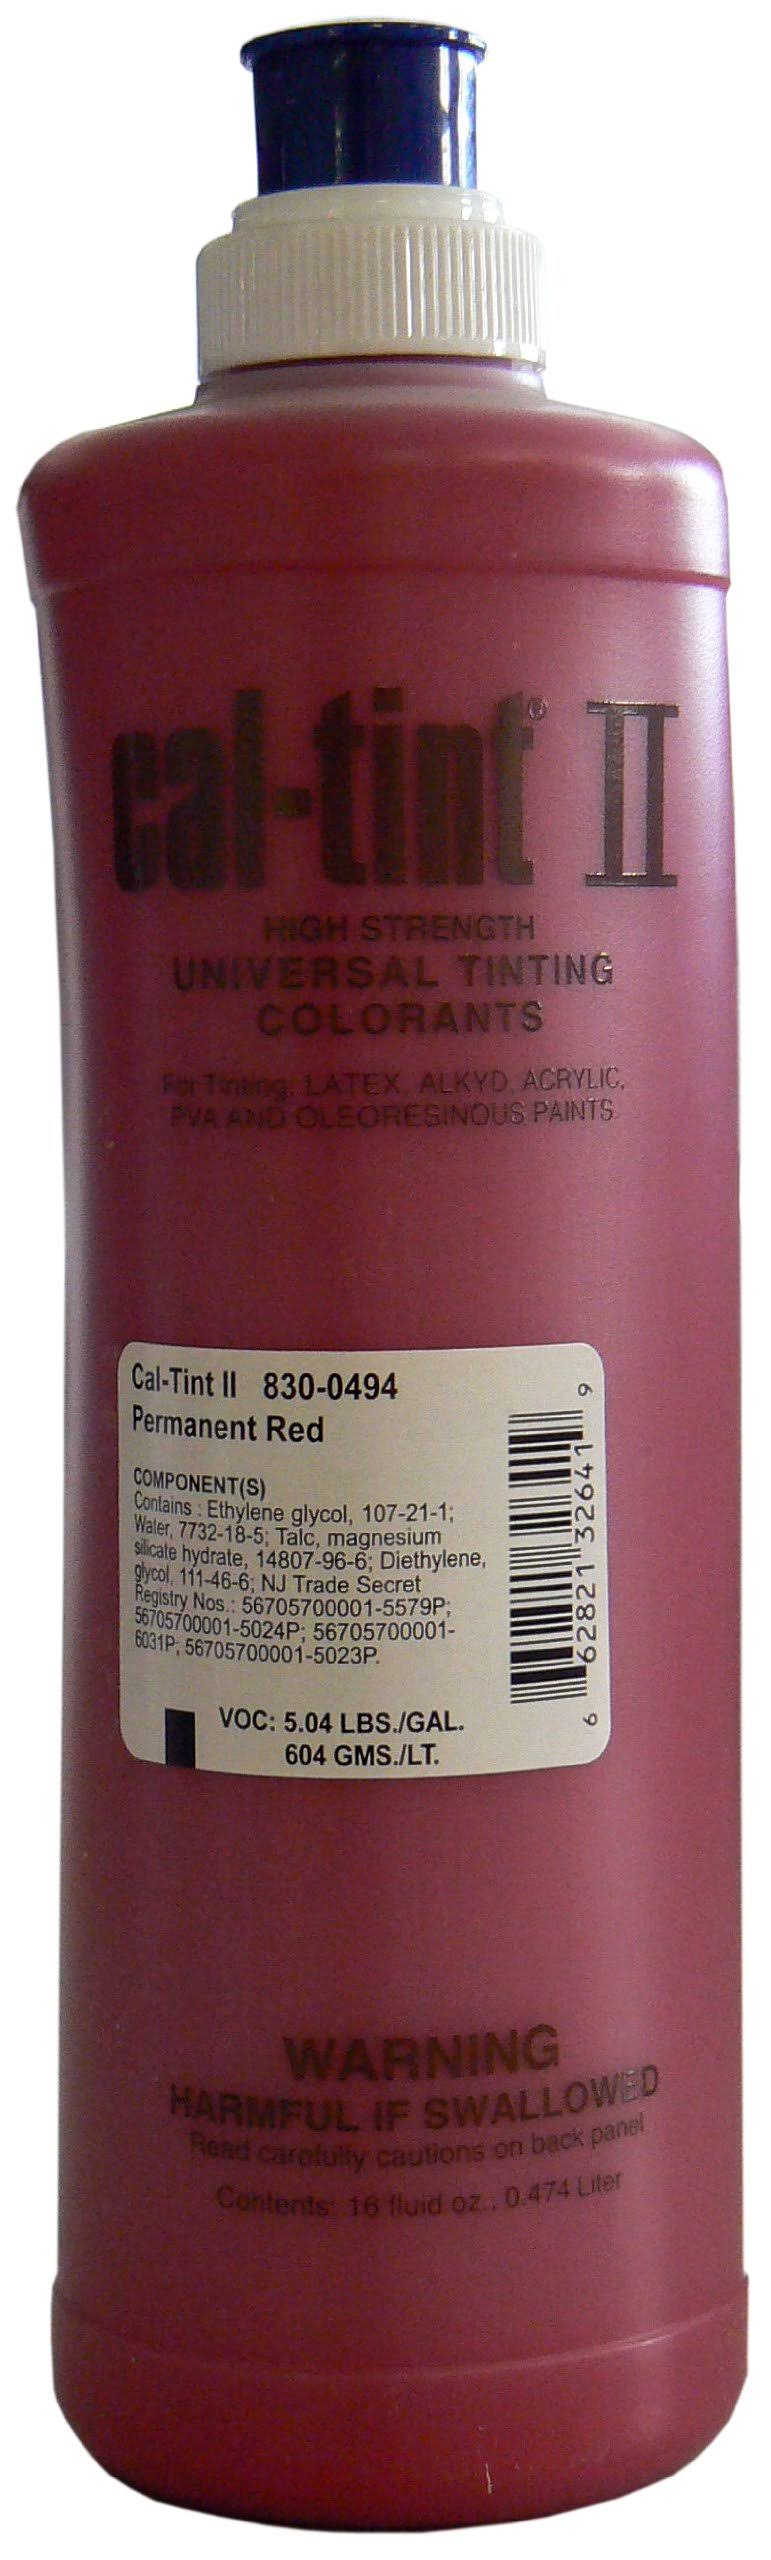 Chromaflo 830-494 Cal-Tint II 16-Ounce Colorants Permanent Red